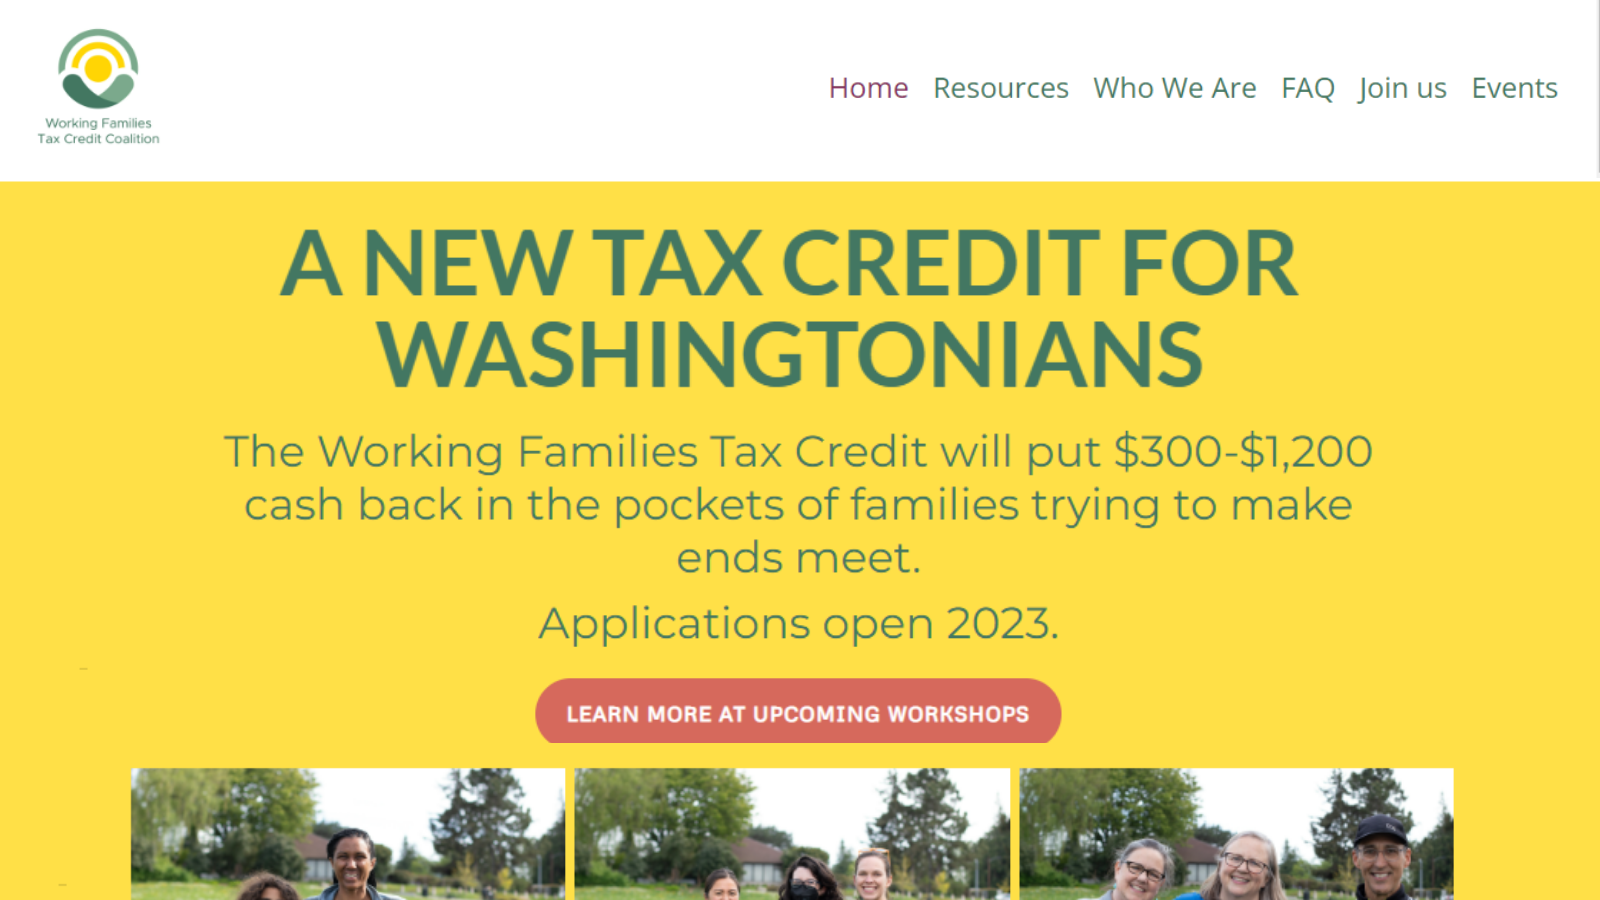 The Working Families Tax Credit is Coming to Washington Households!